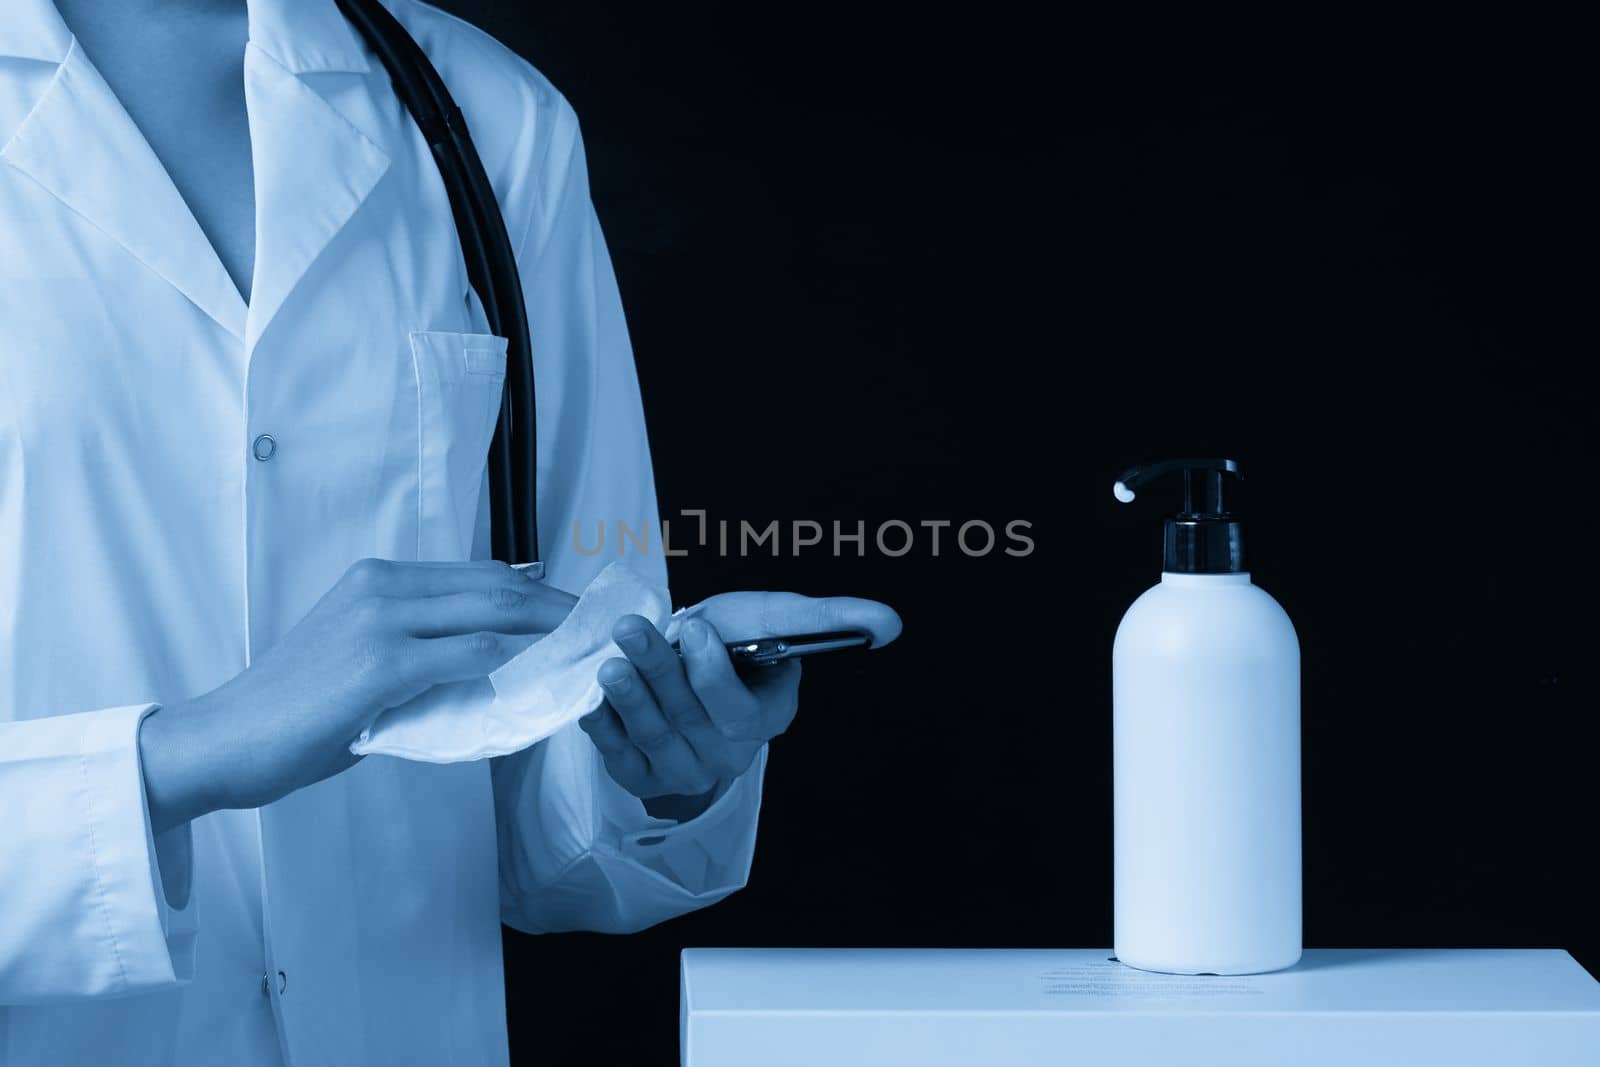 disinfection of the phone with a sanitizer. the doctor disinfects and wipes the smartphone with napkin. copy space